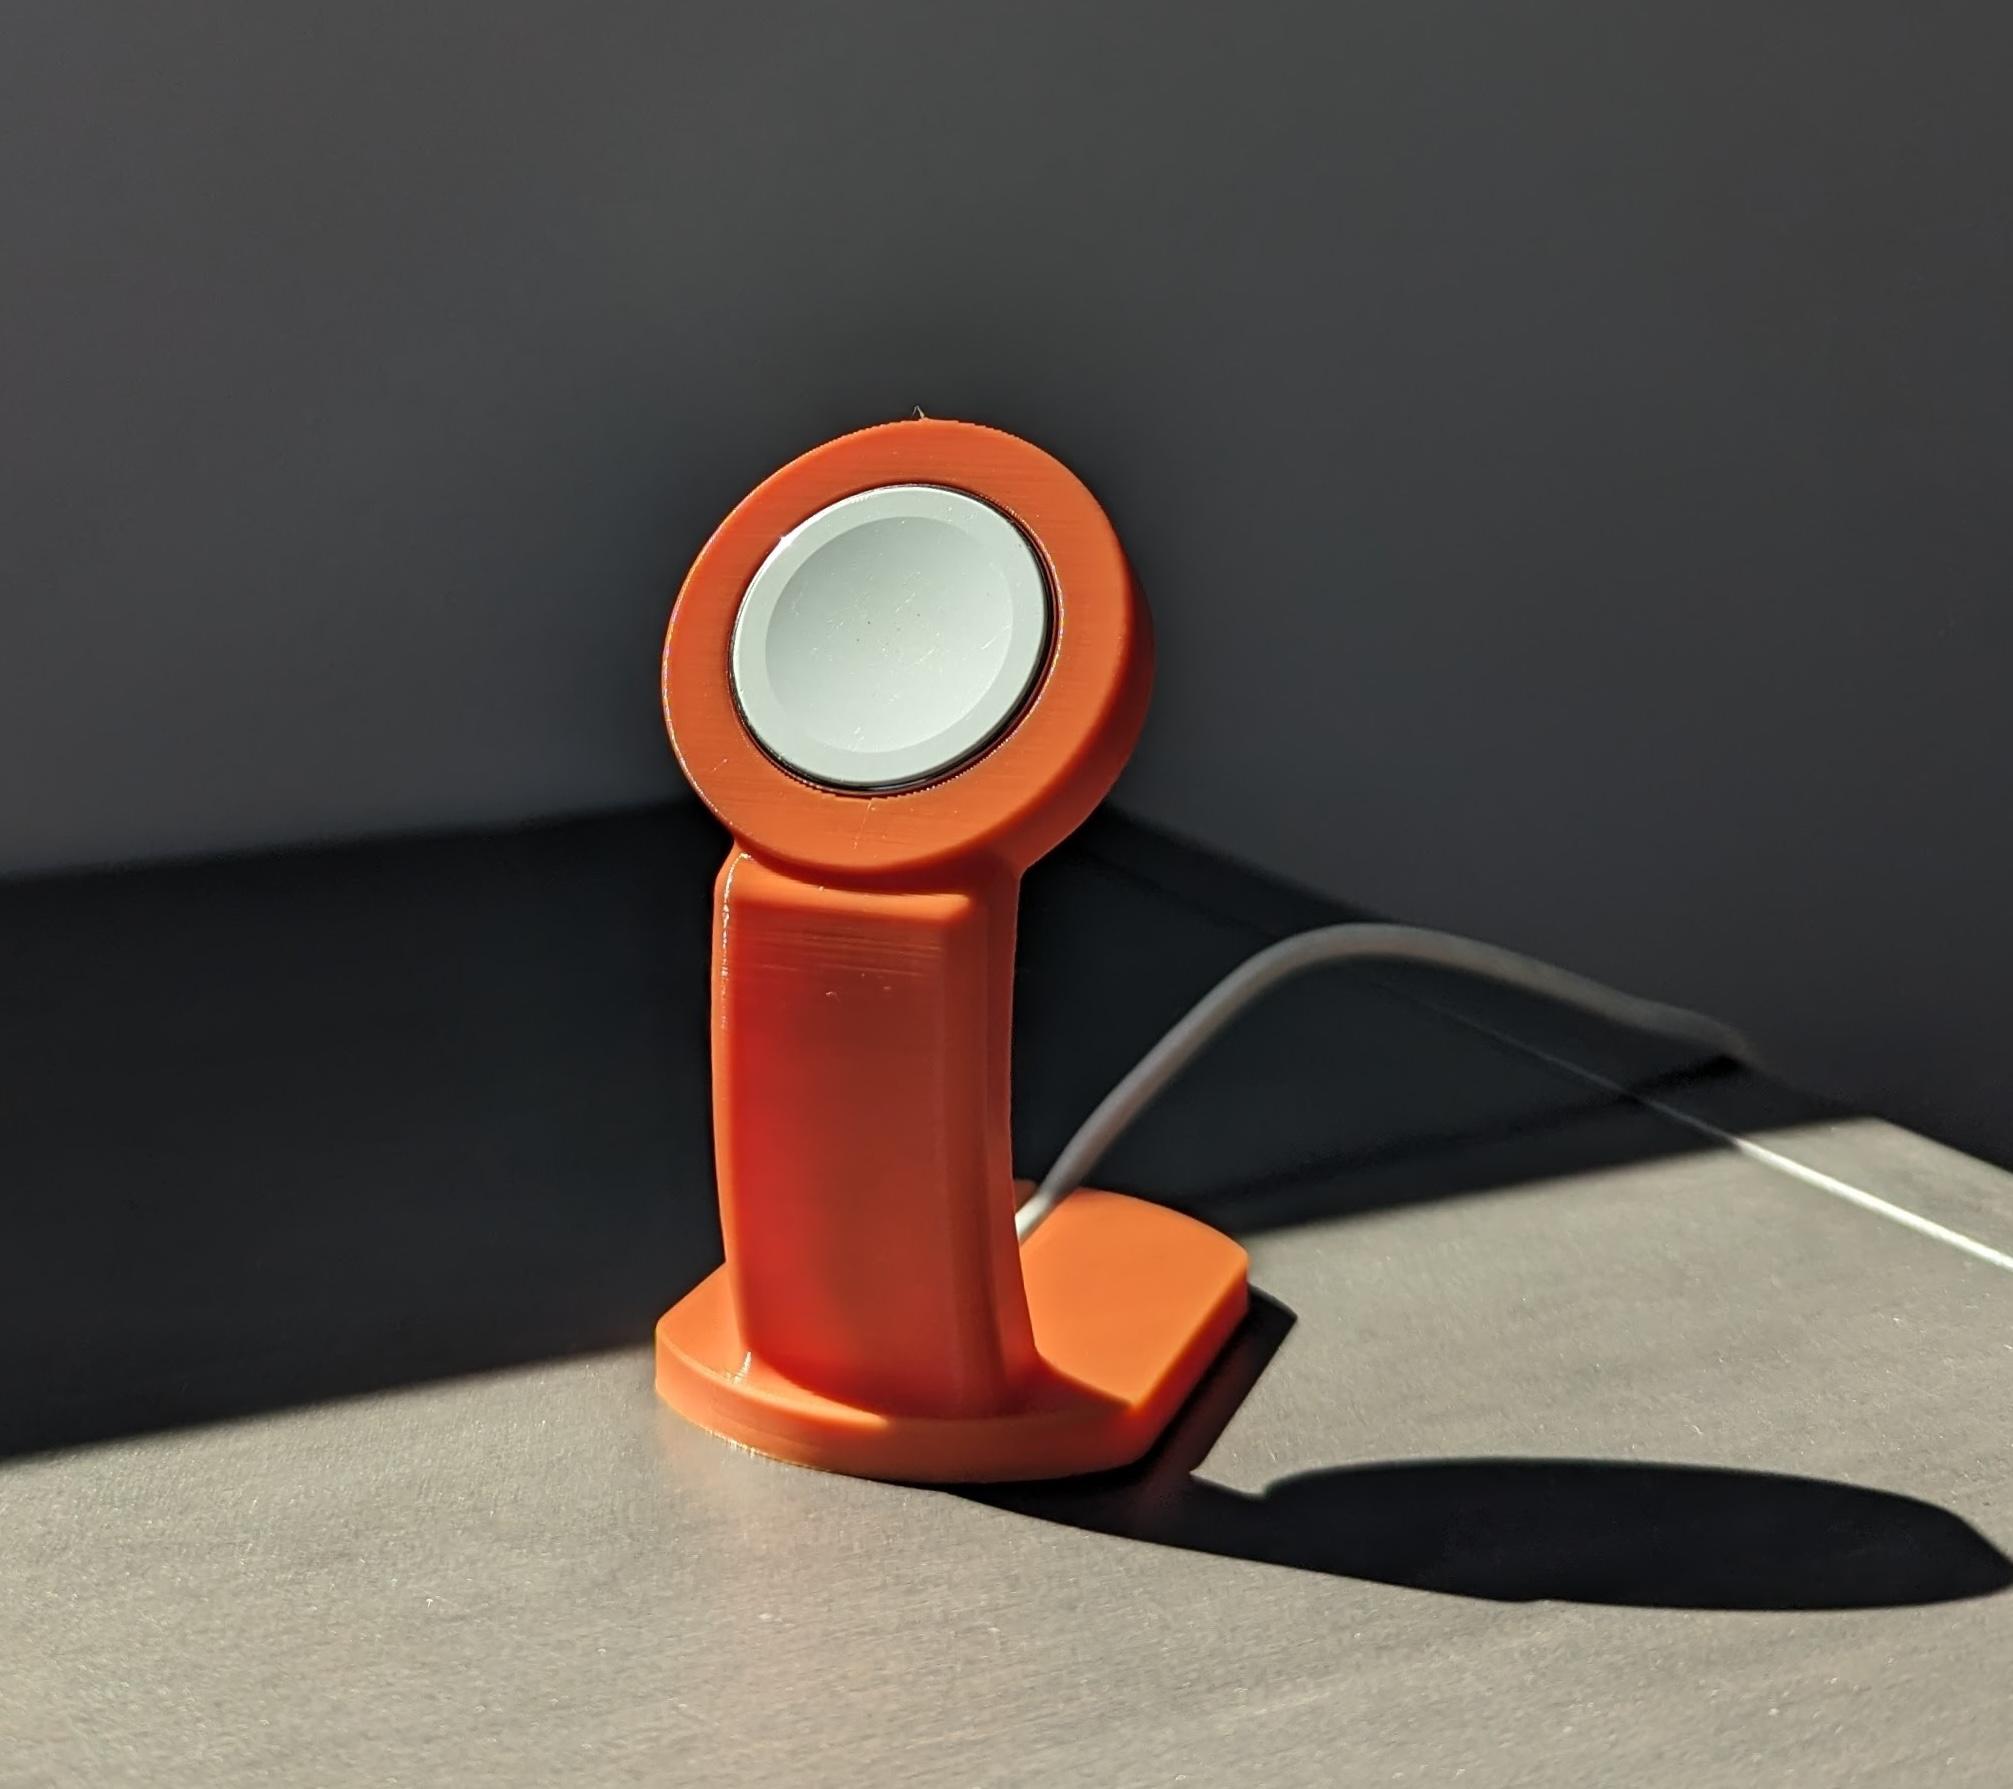 The Pedestal - Apple Watch Charging Stand 3d model